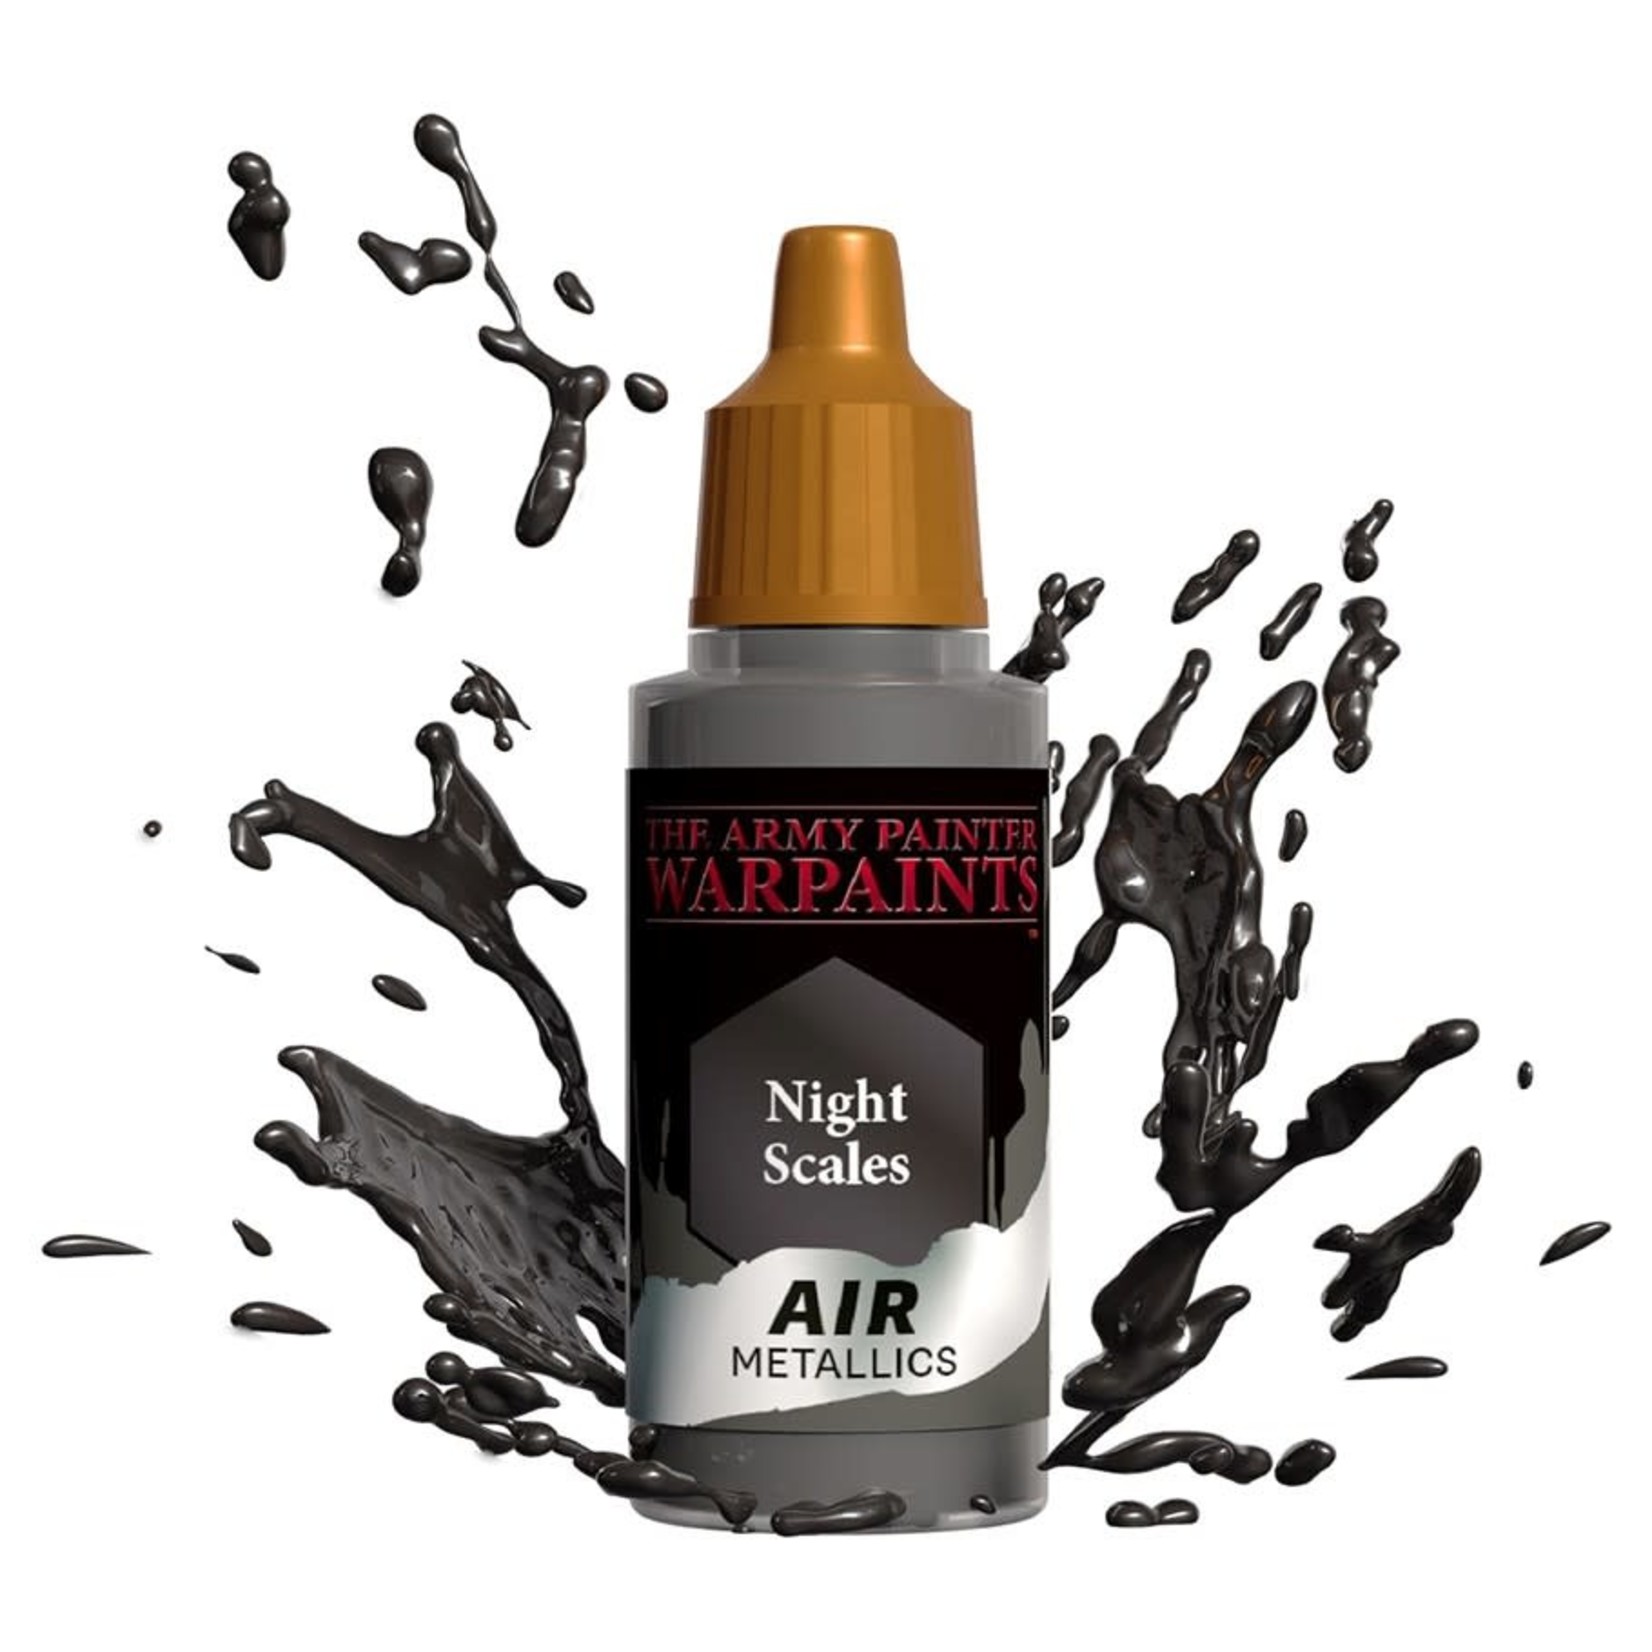 The Army Painter The Army Painter Night Scales Air 18ml